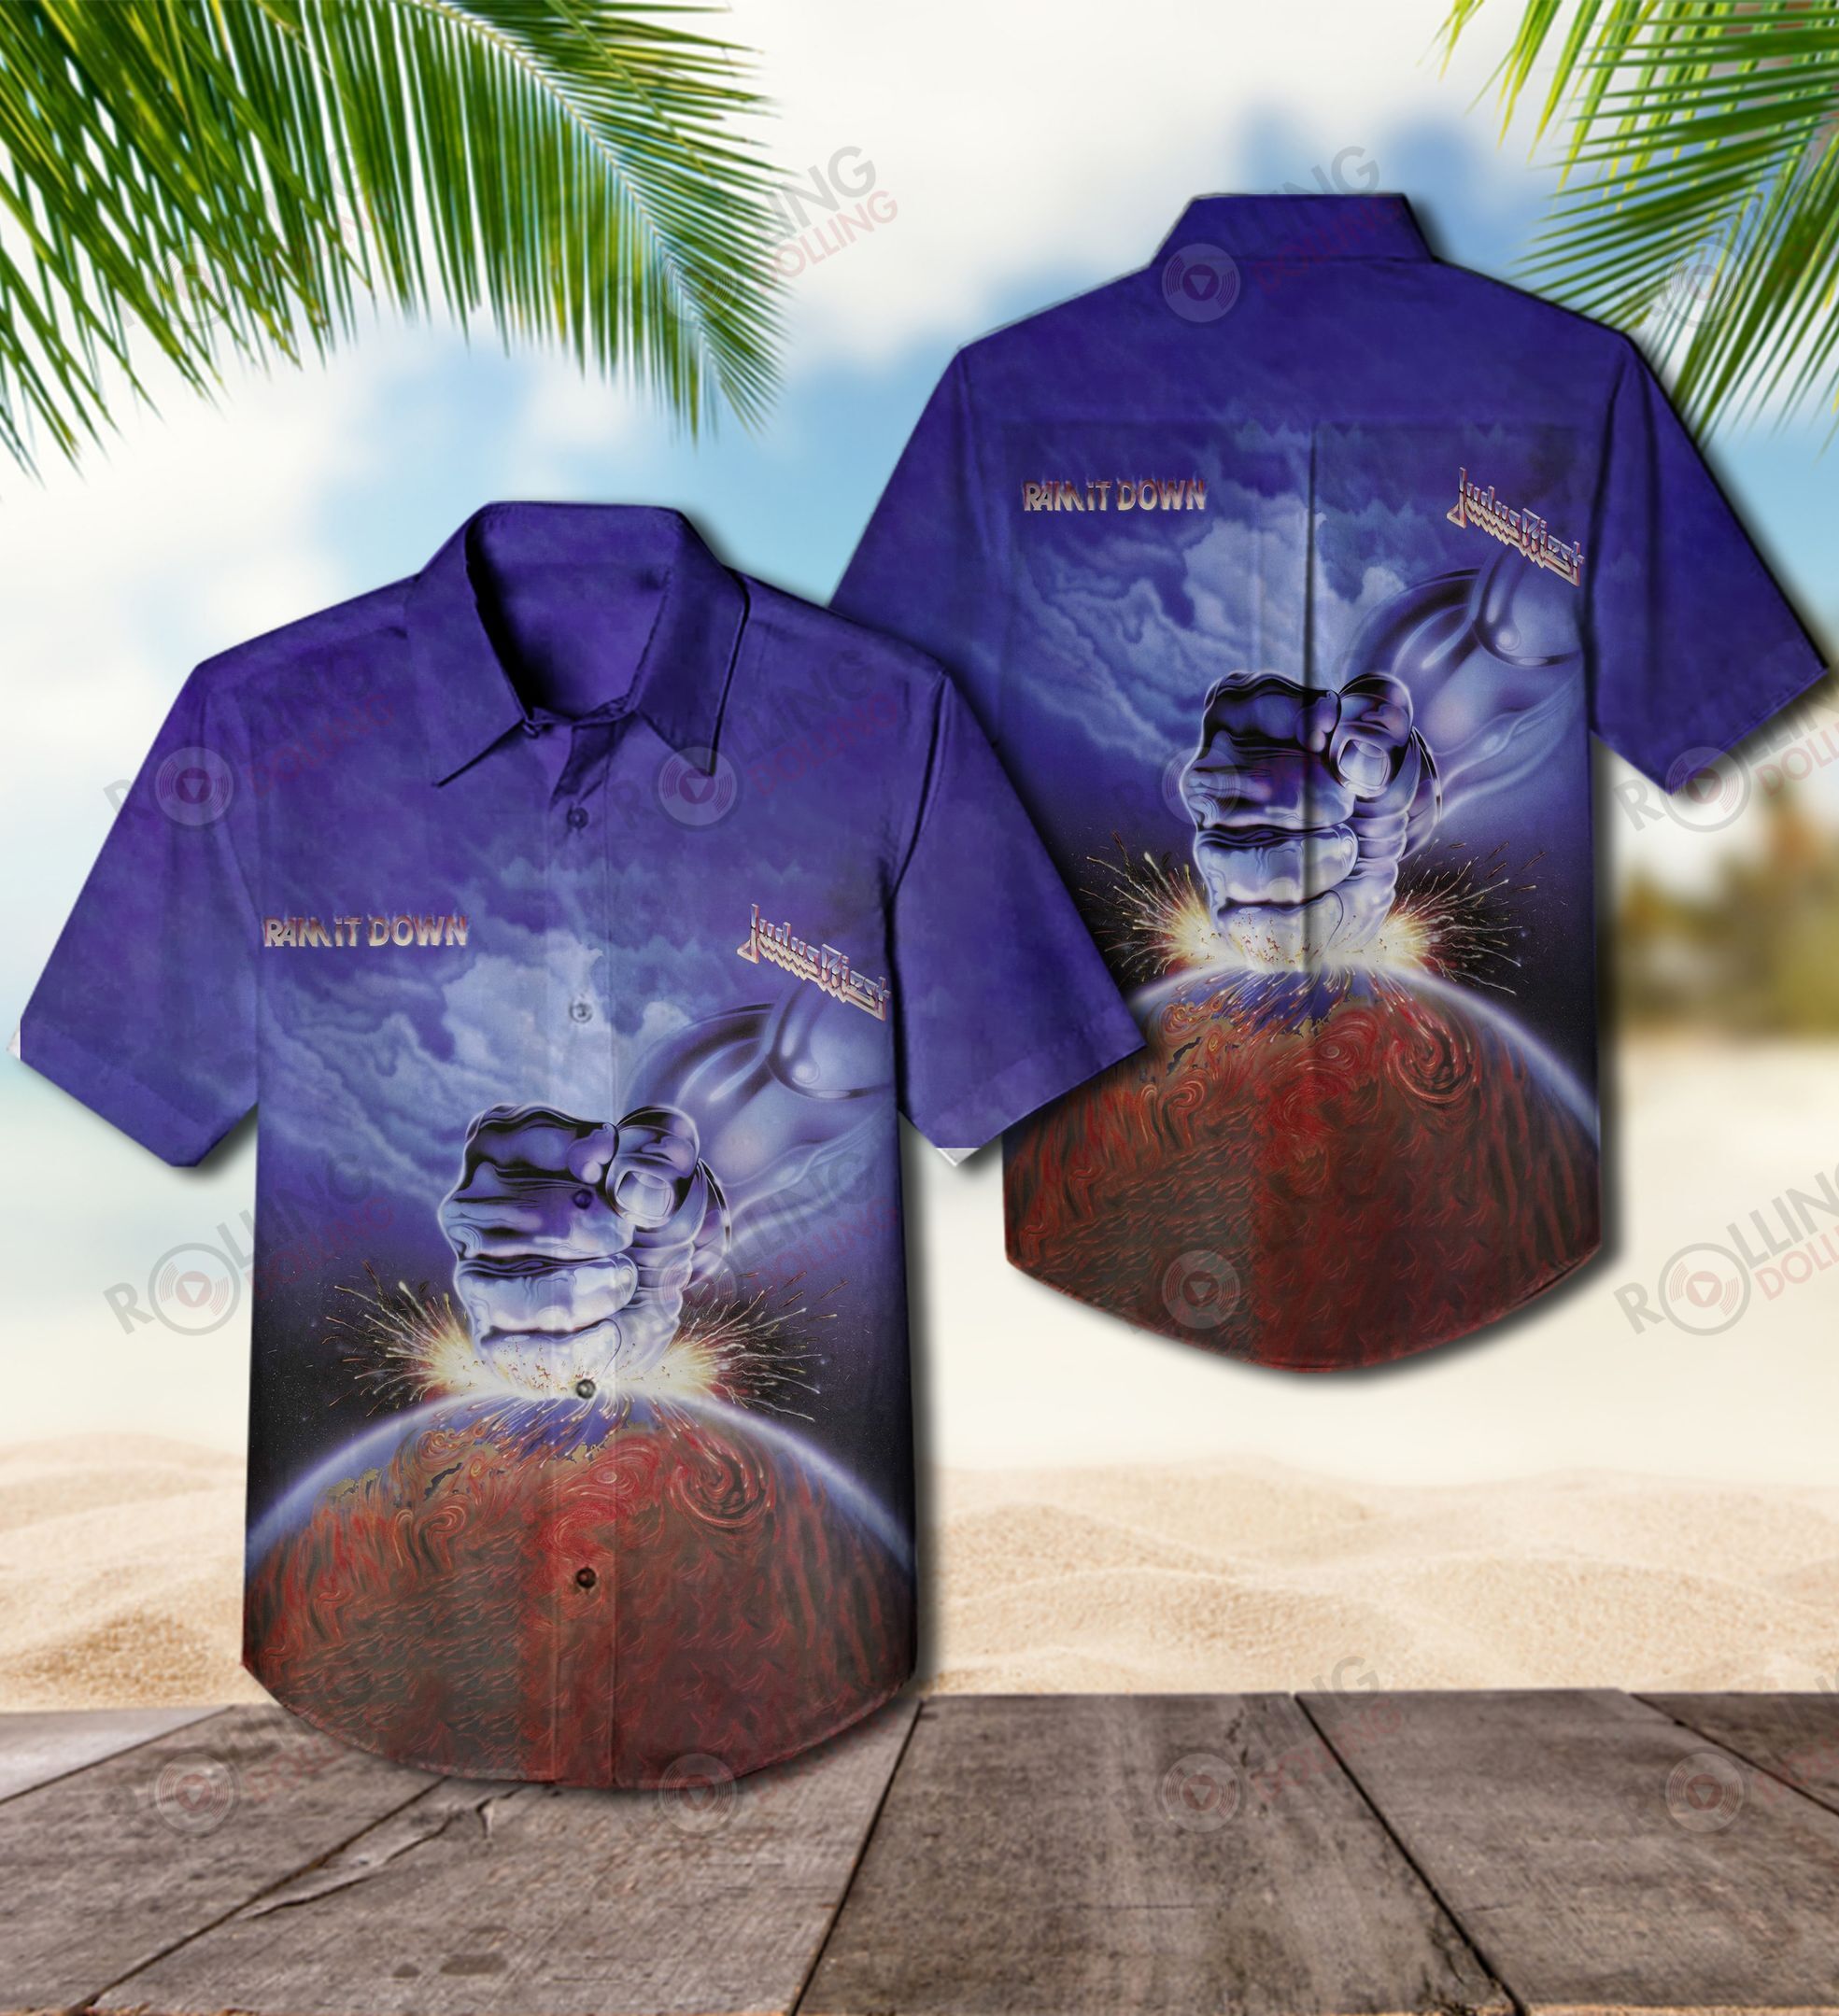 This would make a great gift for any fan who loves Hawaiian Shirt as well as Rock band 106